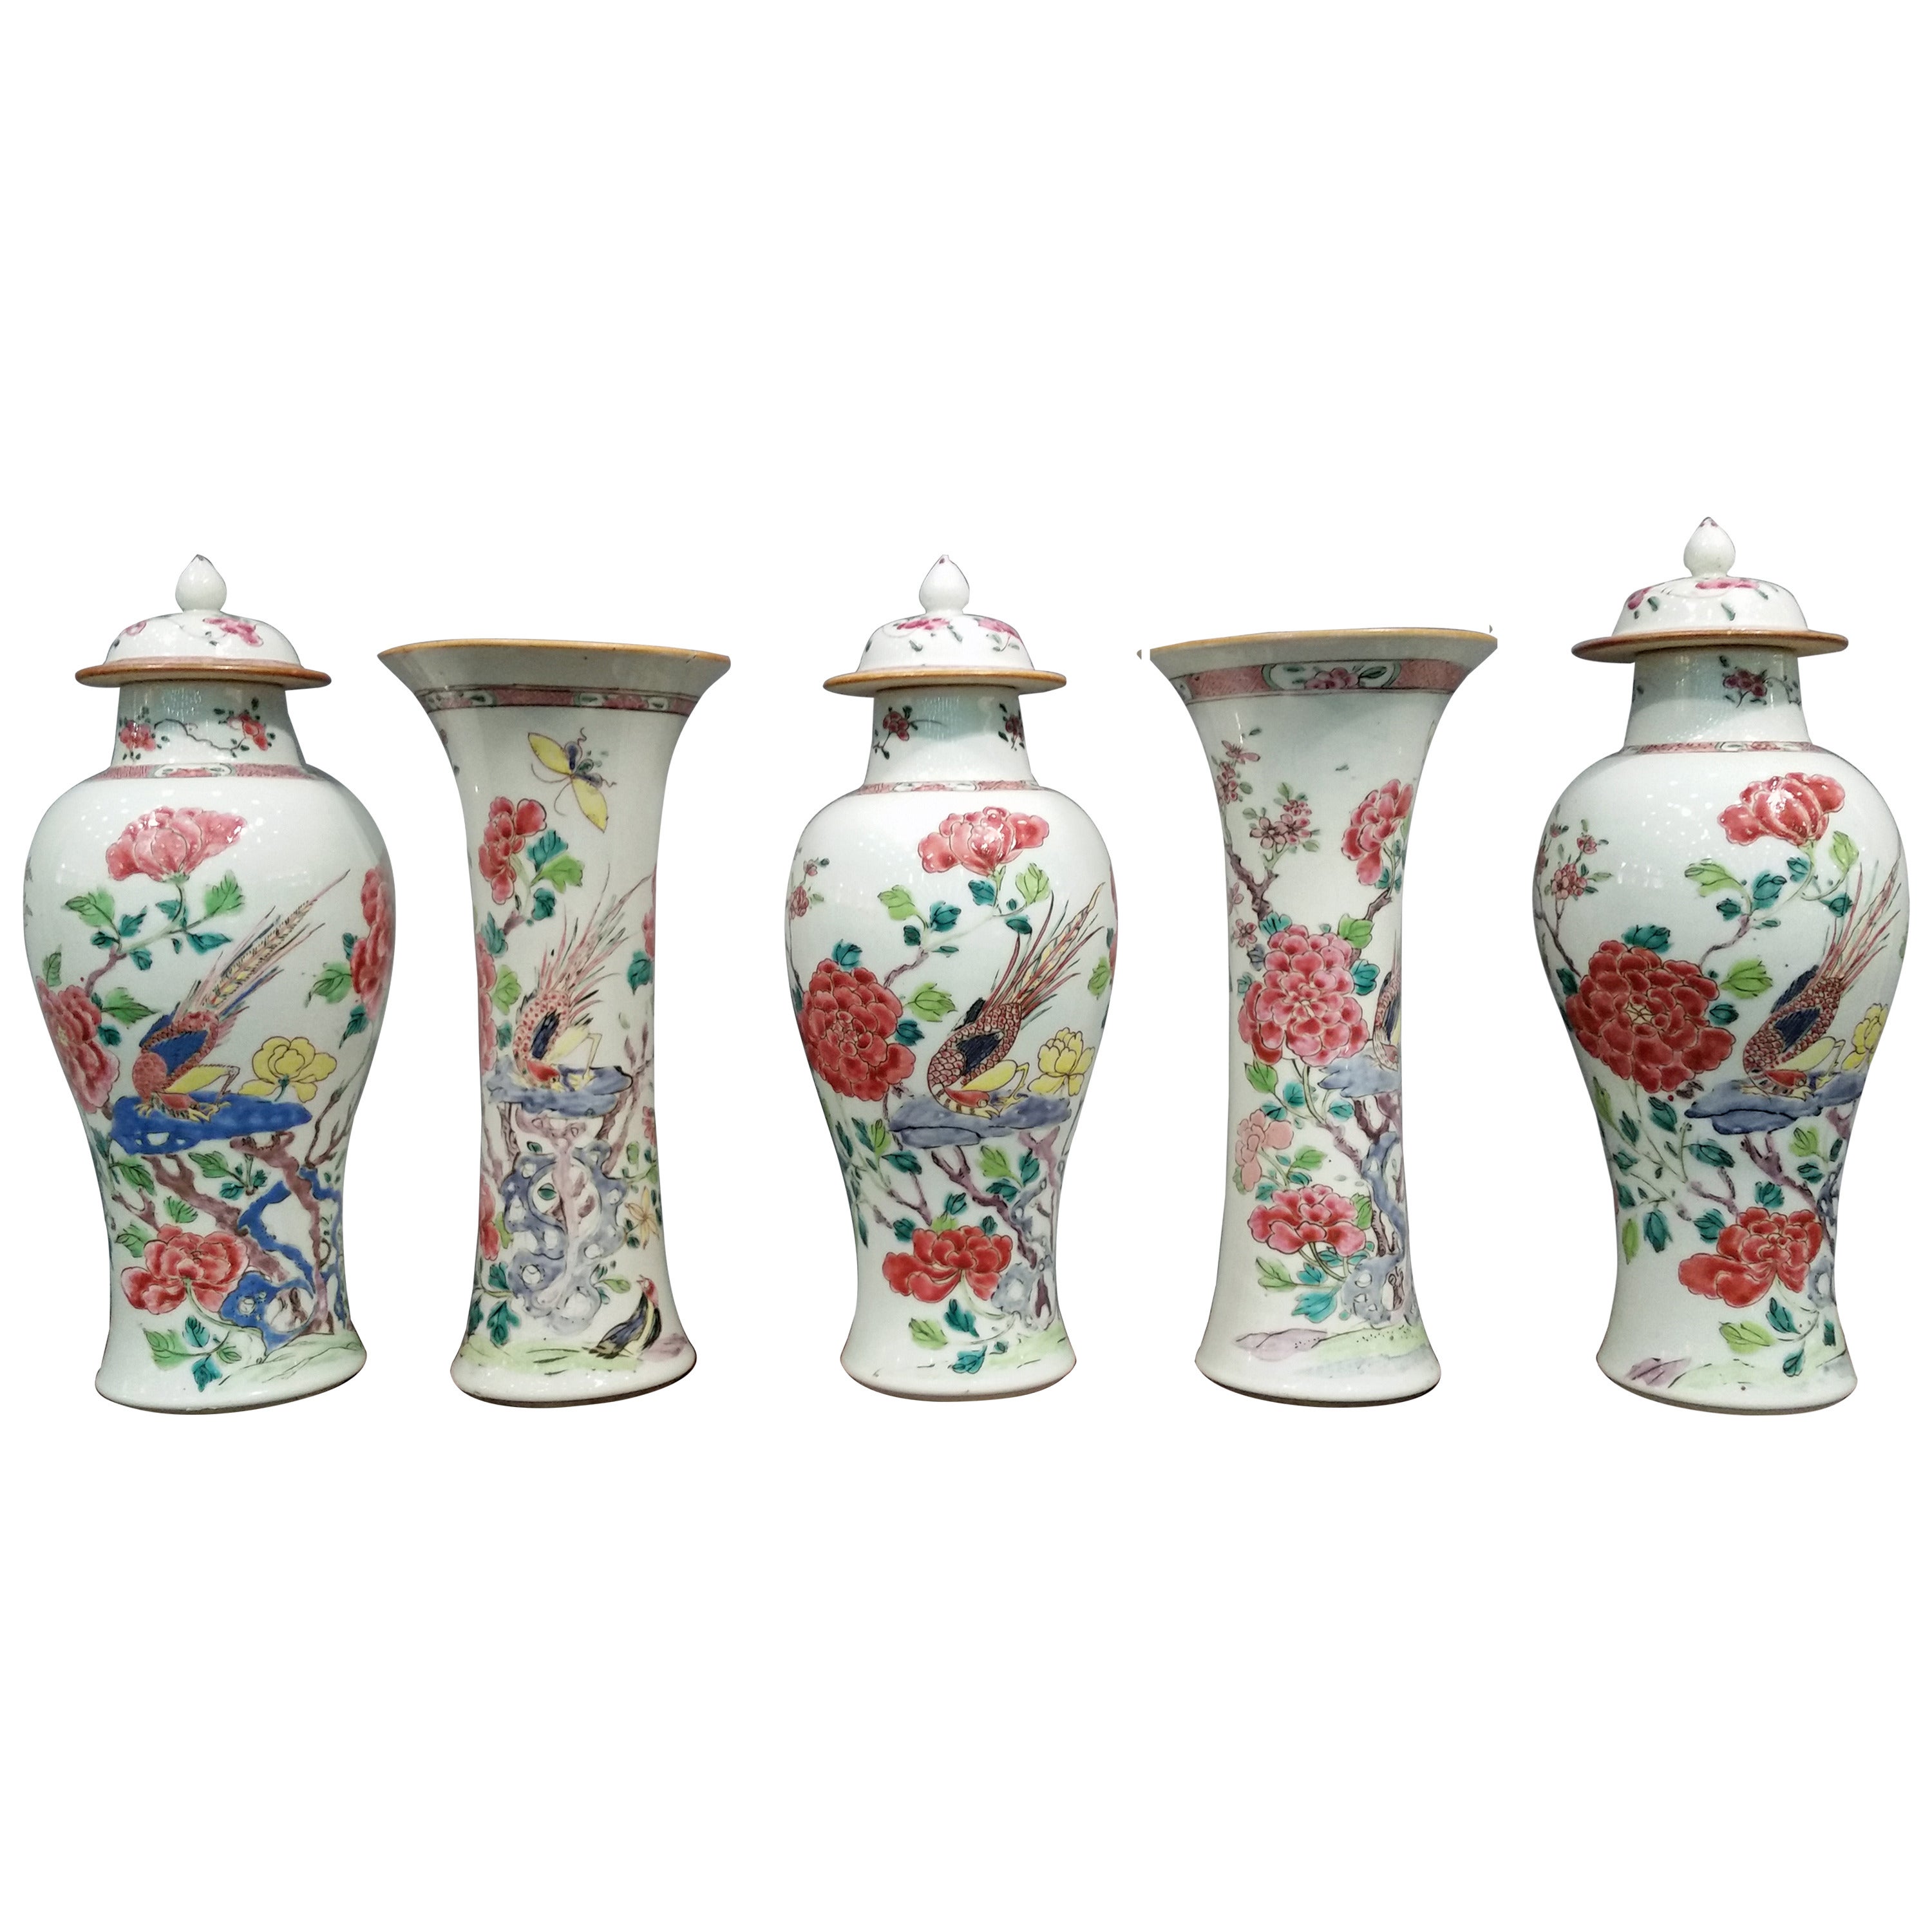 Chinese Export Porcelain Famille Rose Garniture of Vases and Covers